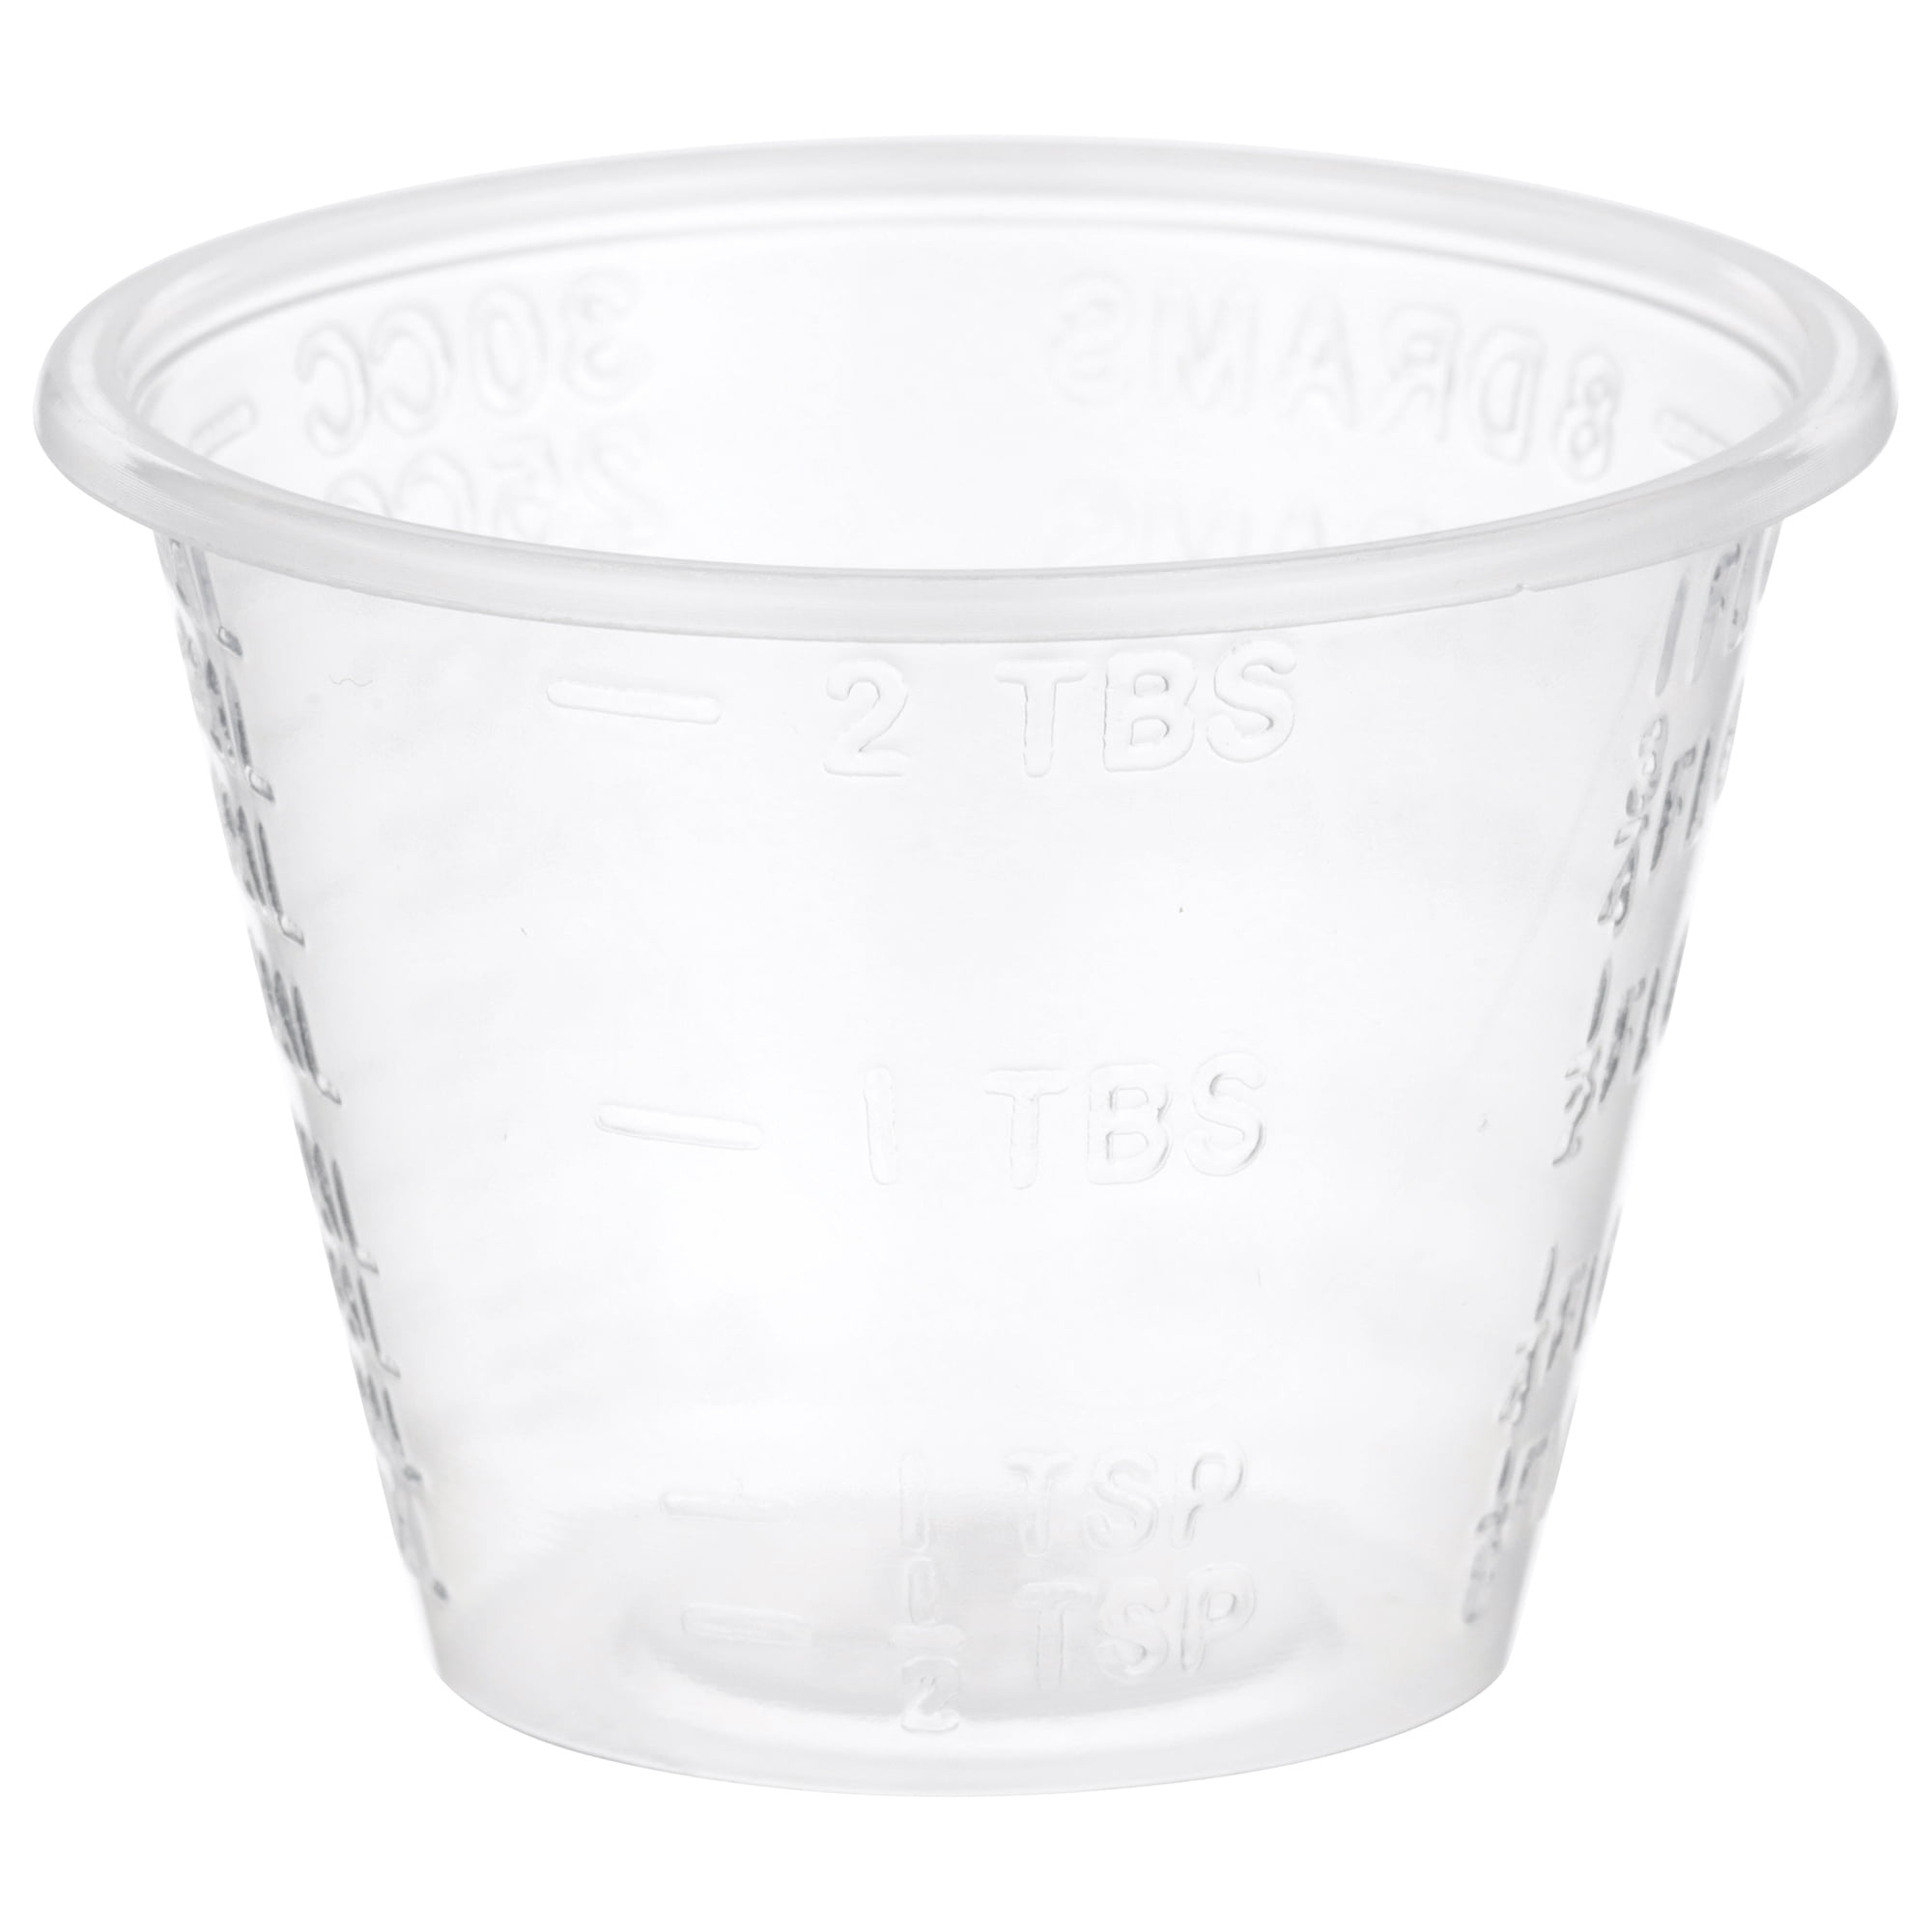 McKesson Drinking Cup 5 oz. Clear Polypropylene Disposable, 2000/CS